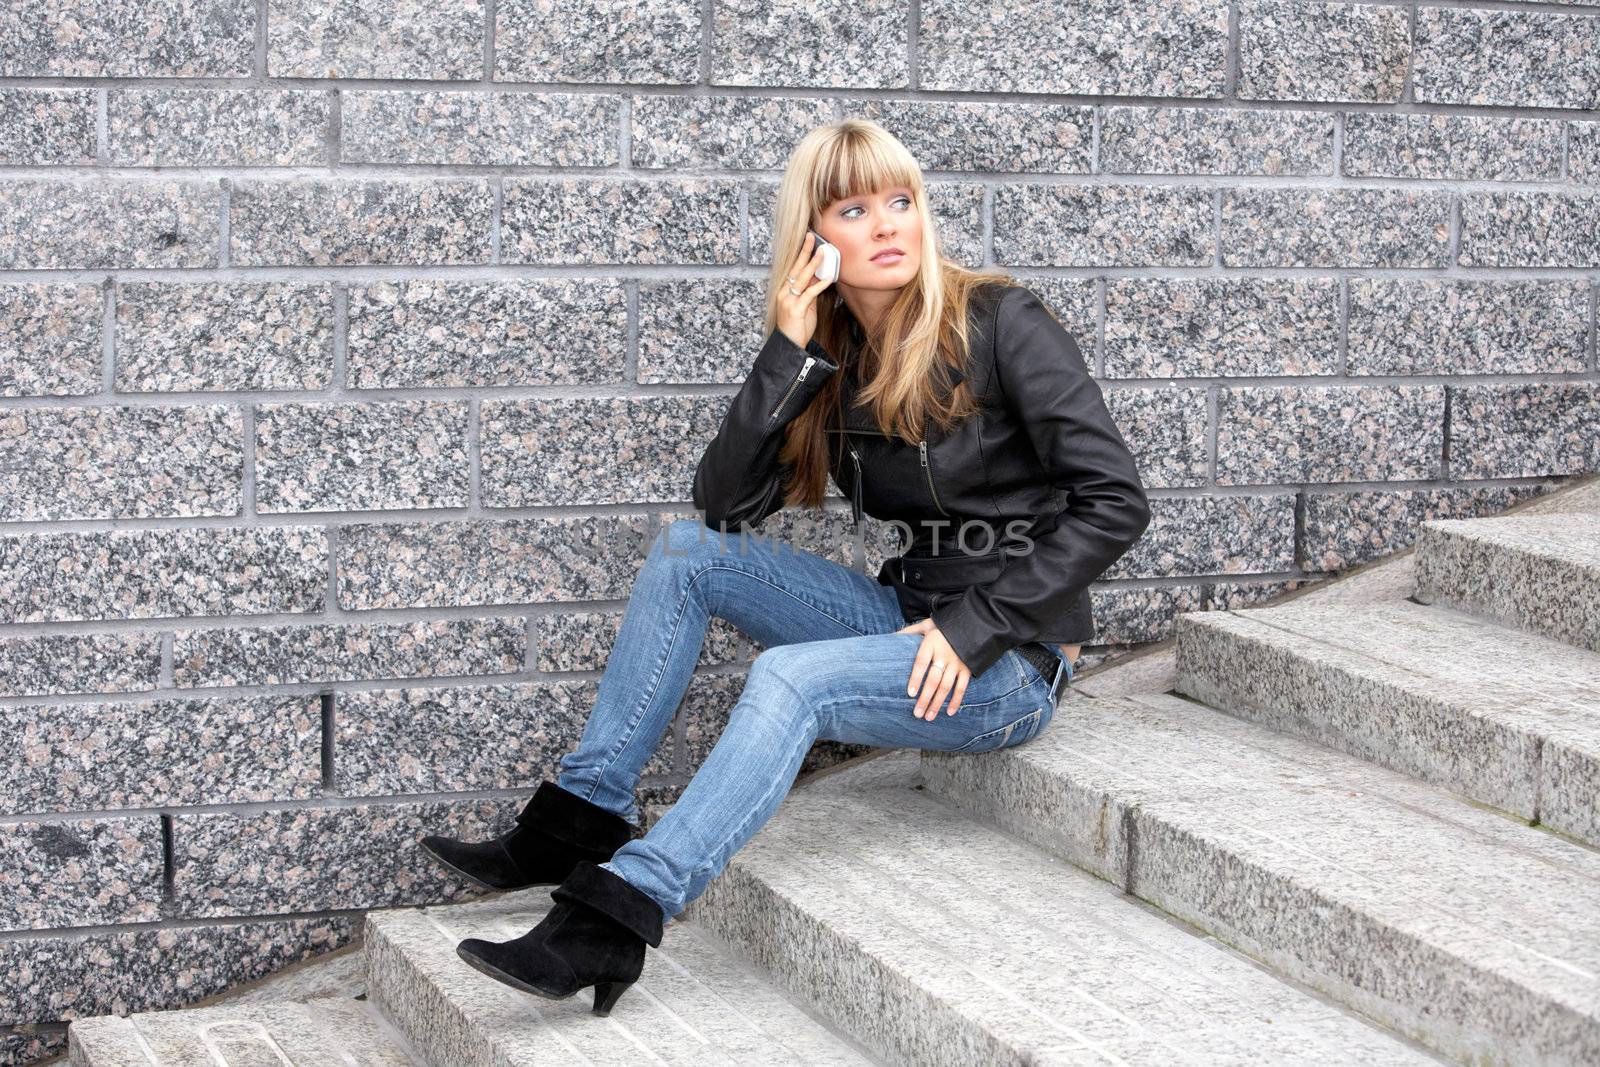 Young Woman On Mobile Phone by Luminis